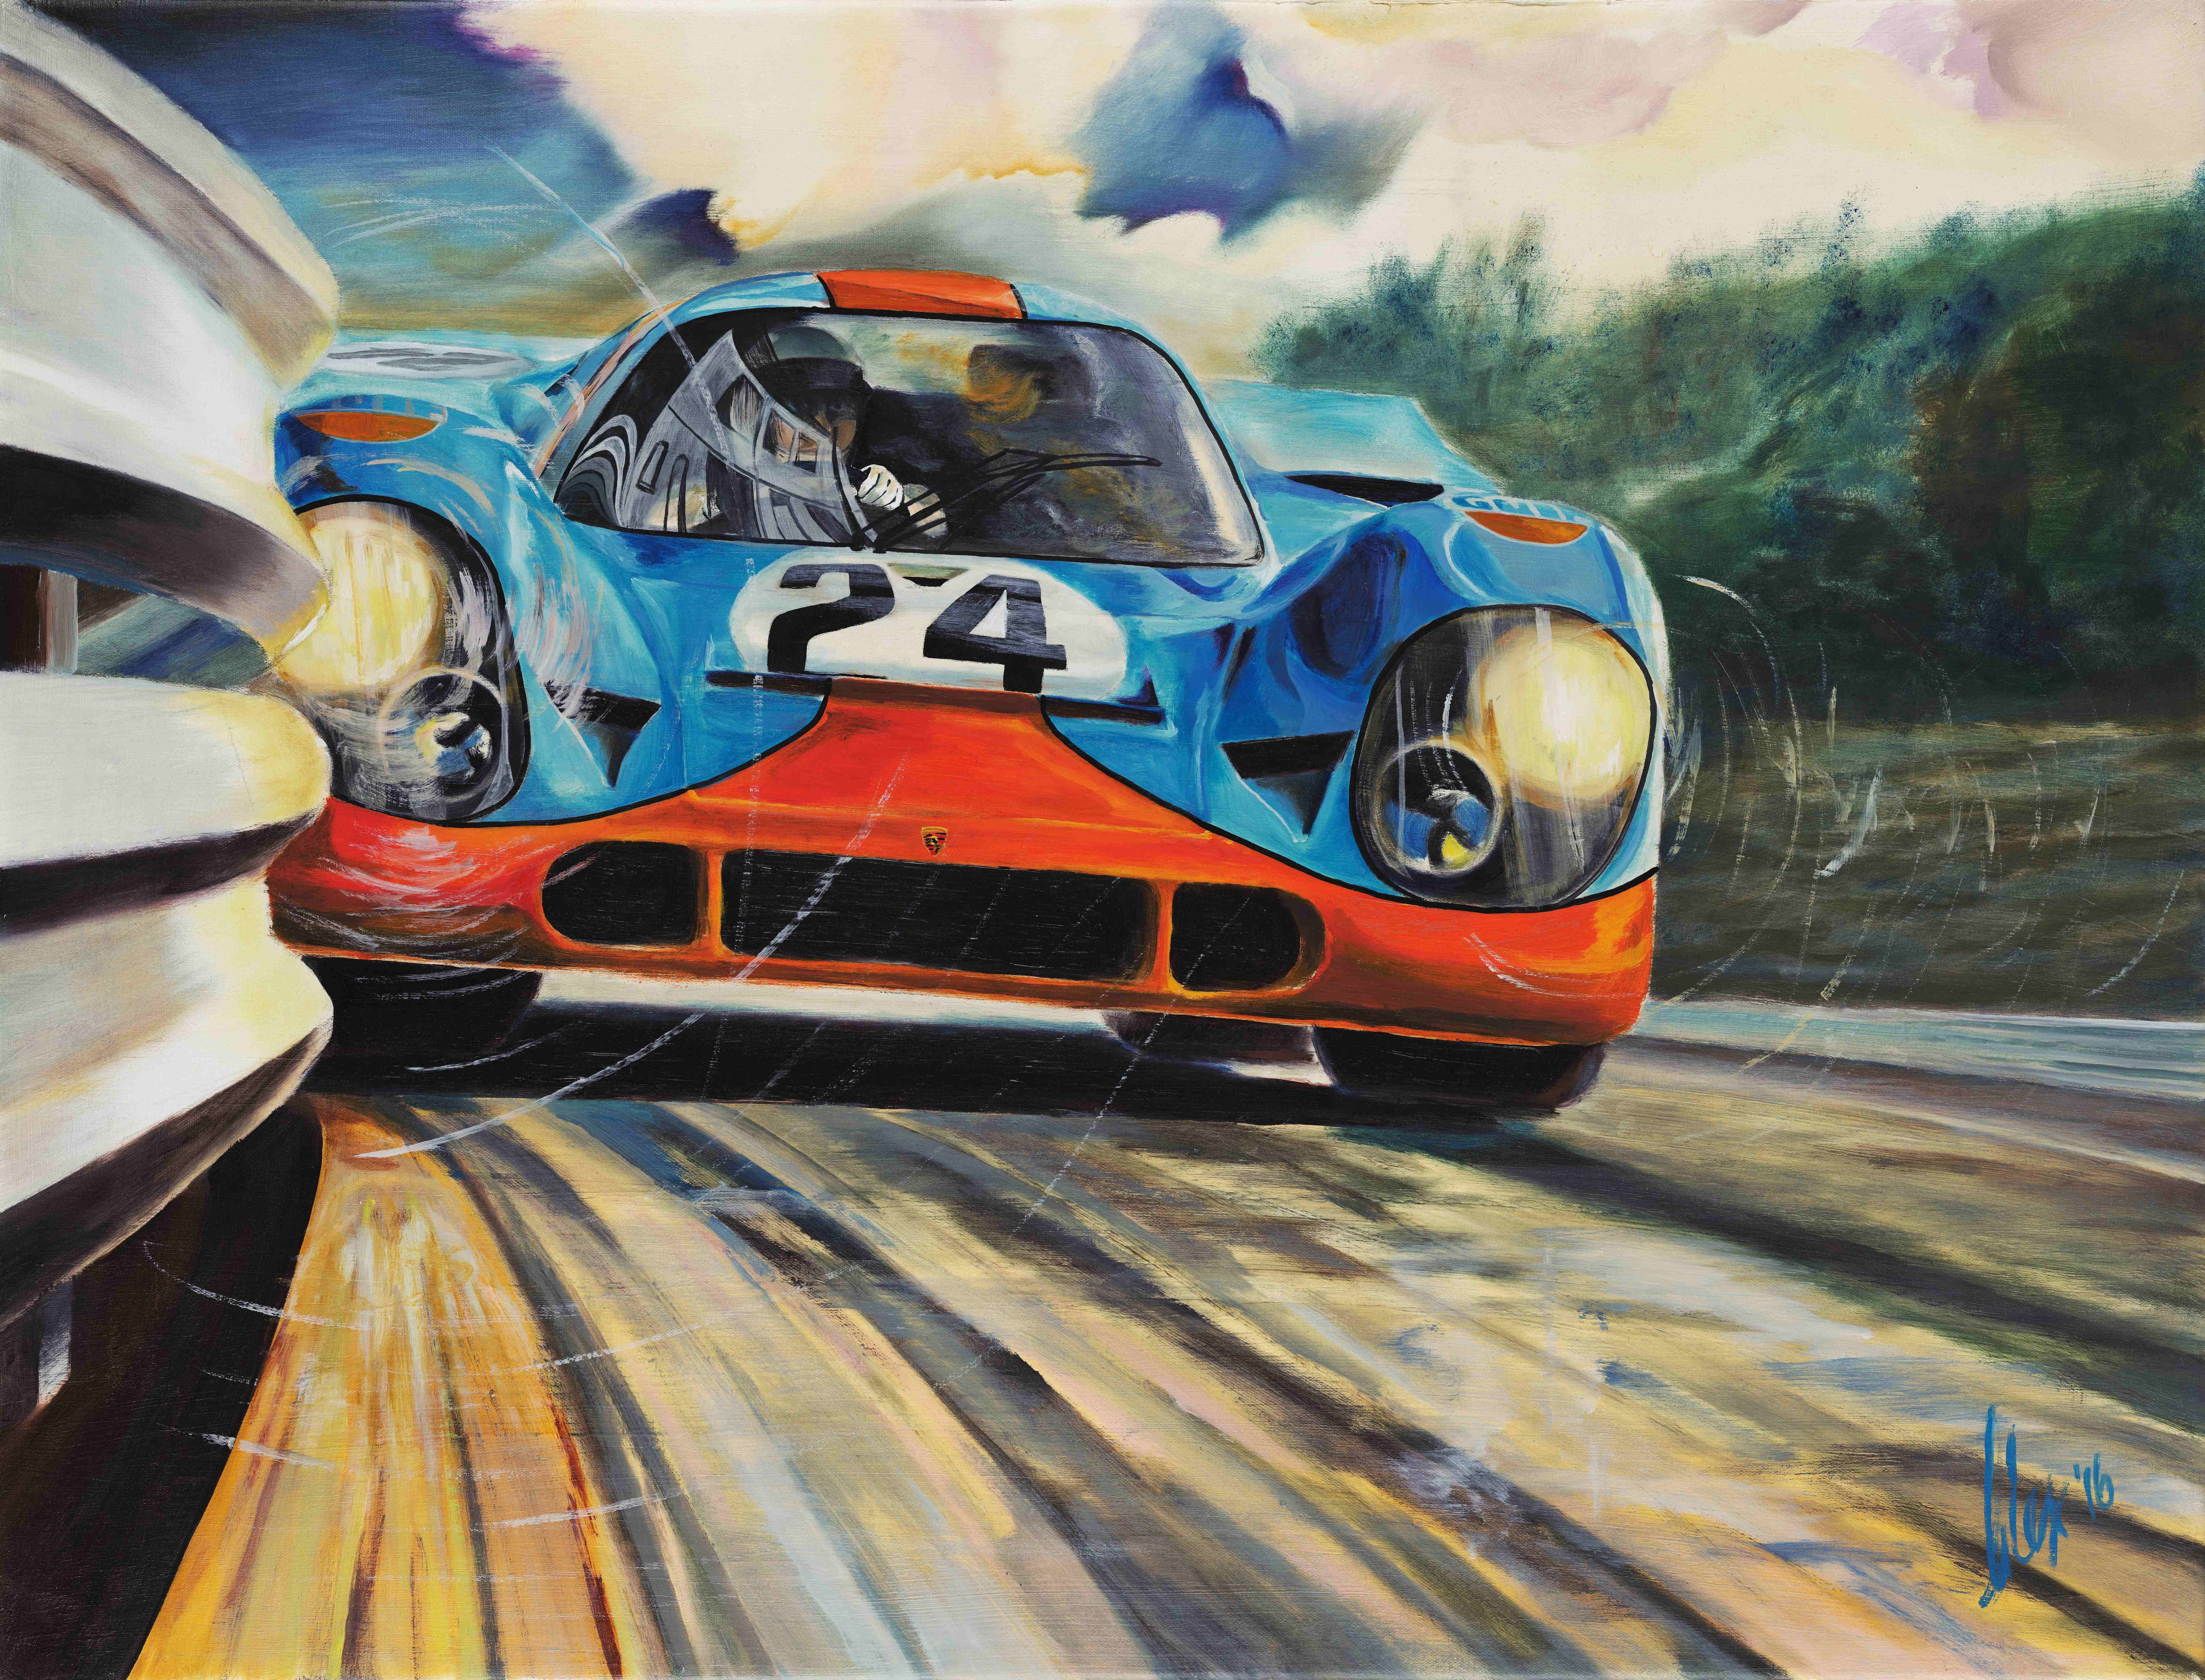 Artwork Oil Painting Gulf Porsche 917 Alex Wakefield Spa Francorchamps Signature Front Angle View Sk 8000x6097